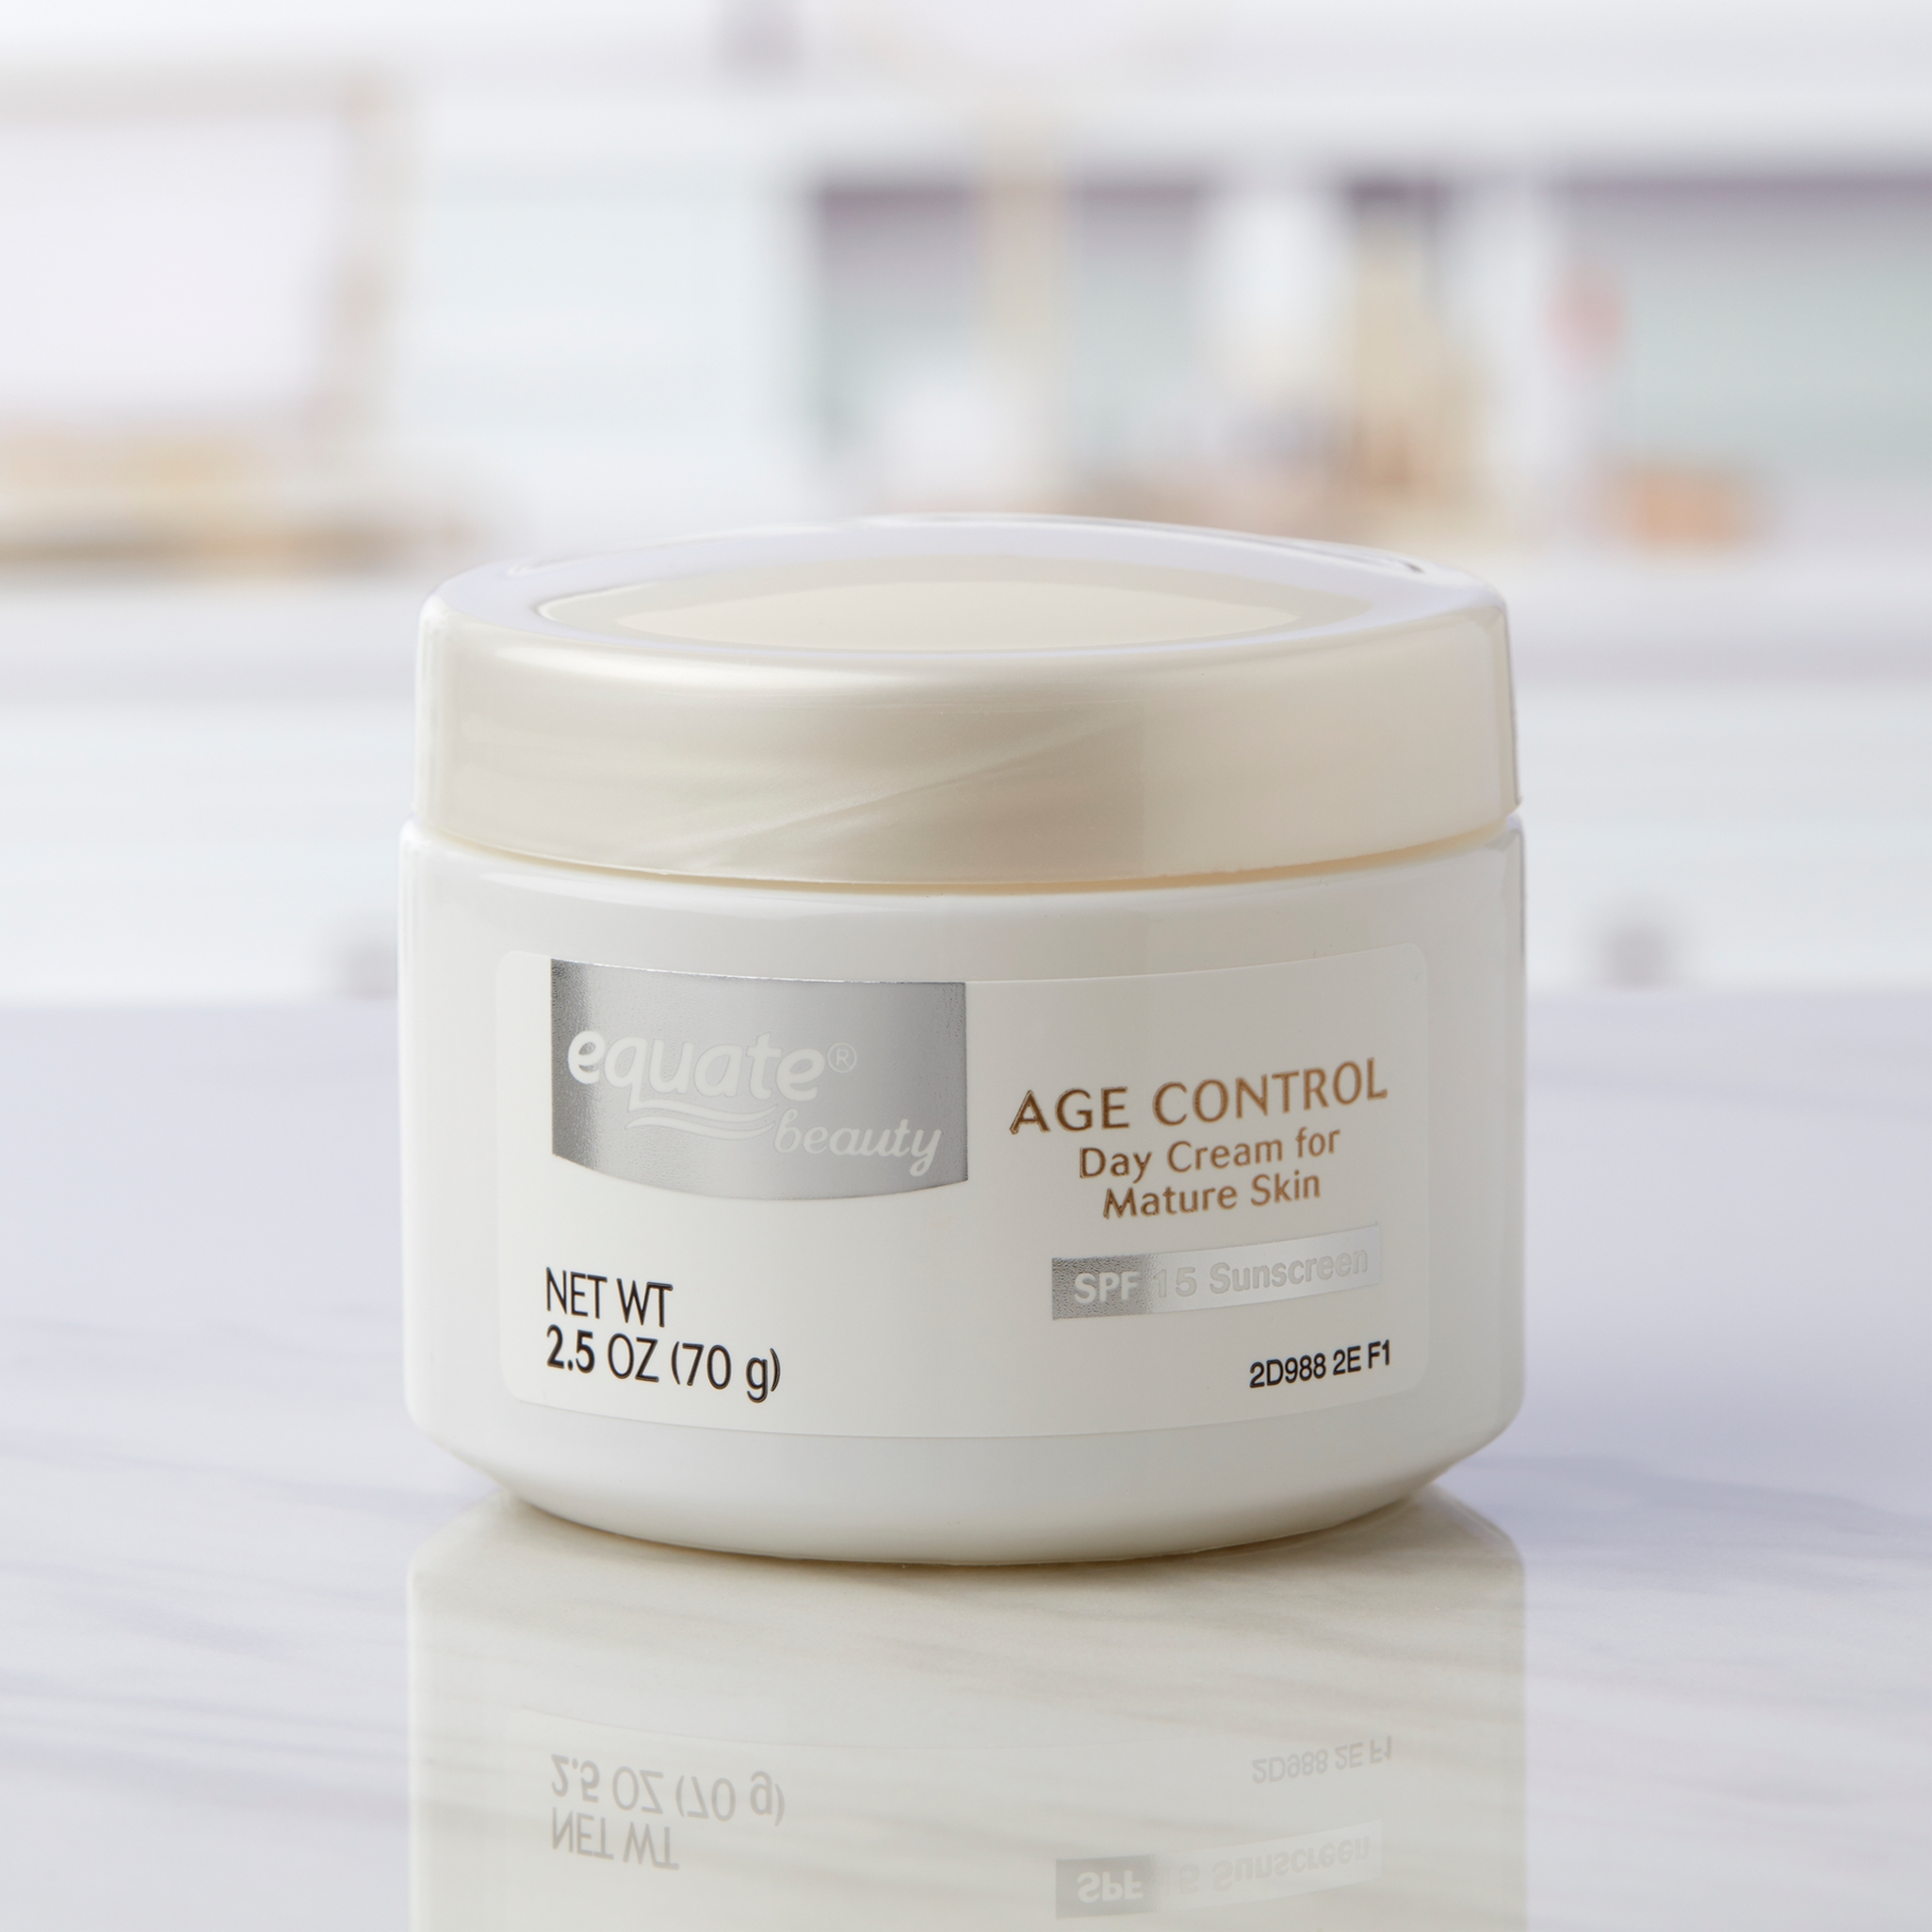 Equate Beauty Age Control Day Cream for Mature Skin Sunscreen, SPF 15, 2.5 fl oz - image 2 of 10